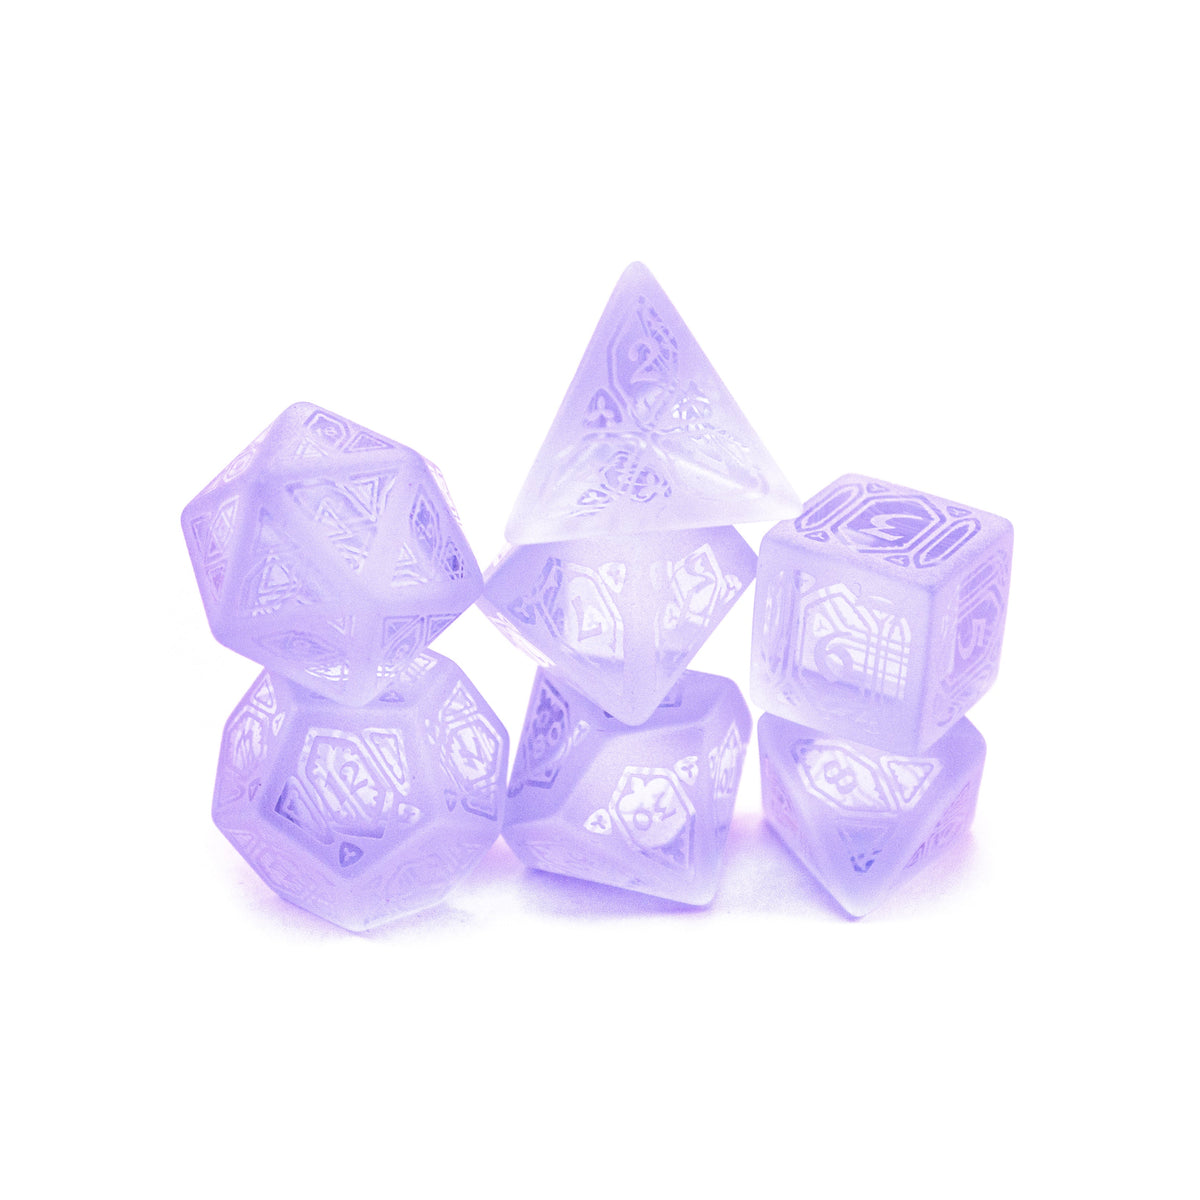 Level Up Dice - Gothic Cathedral Colour Infused Crown Crystal (Violet)